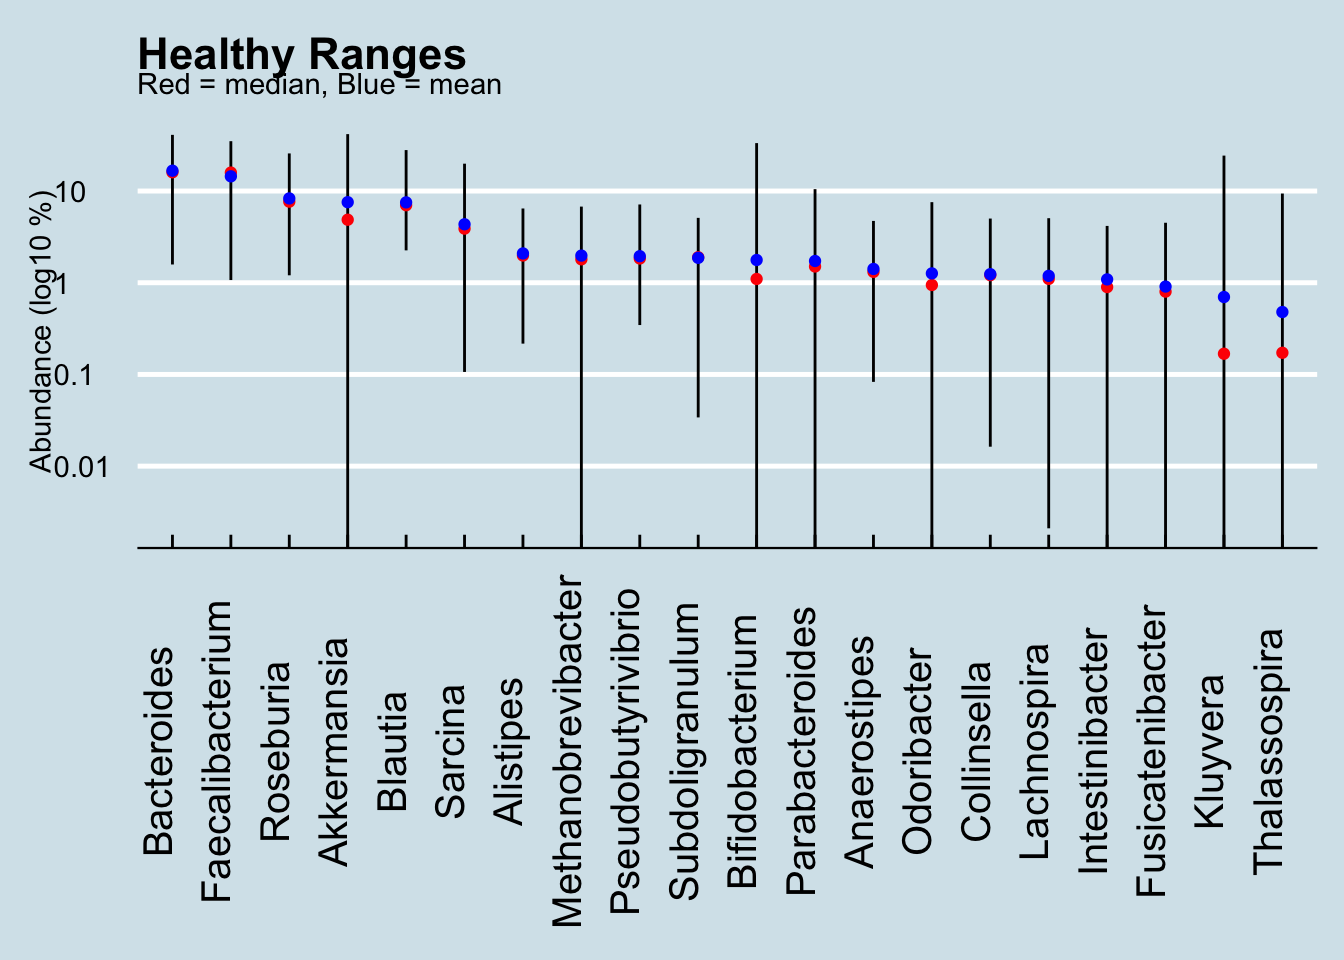 Vertical lines show the abundance ranges found in healthy people (log scale).